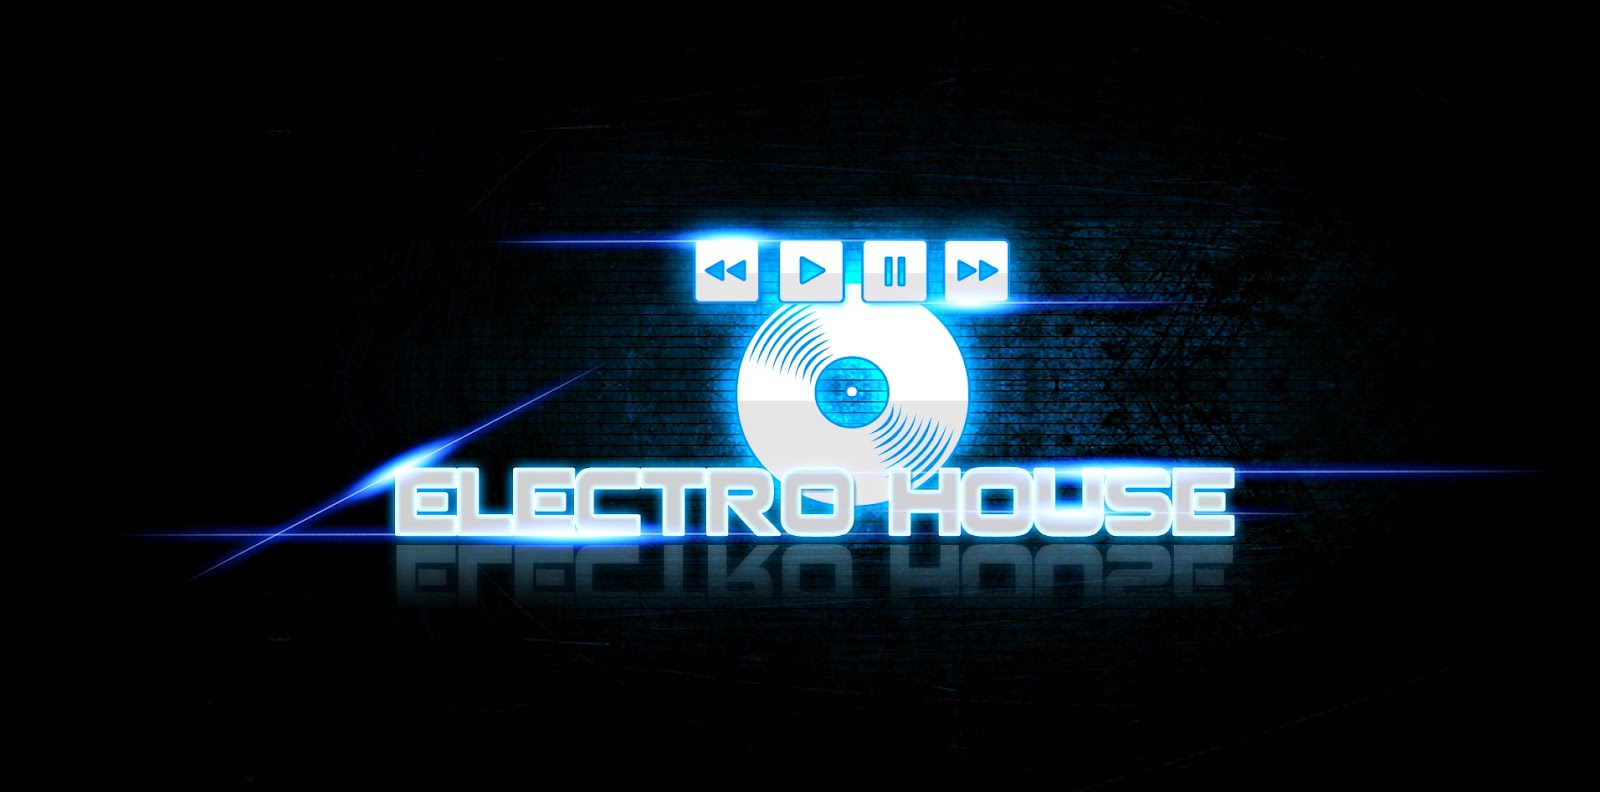 Electro House - TOP 100: Get Electro House Tracks on